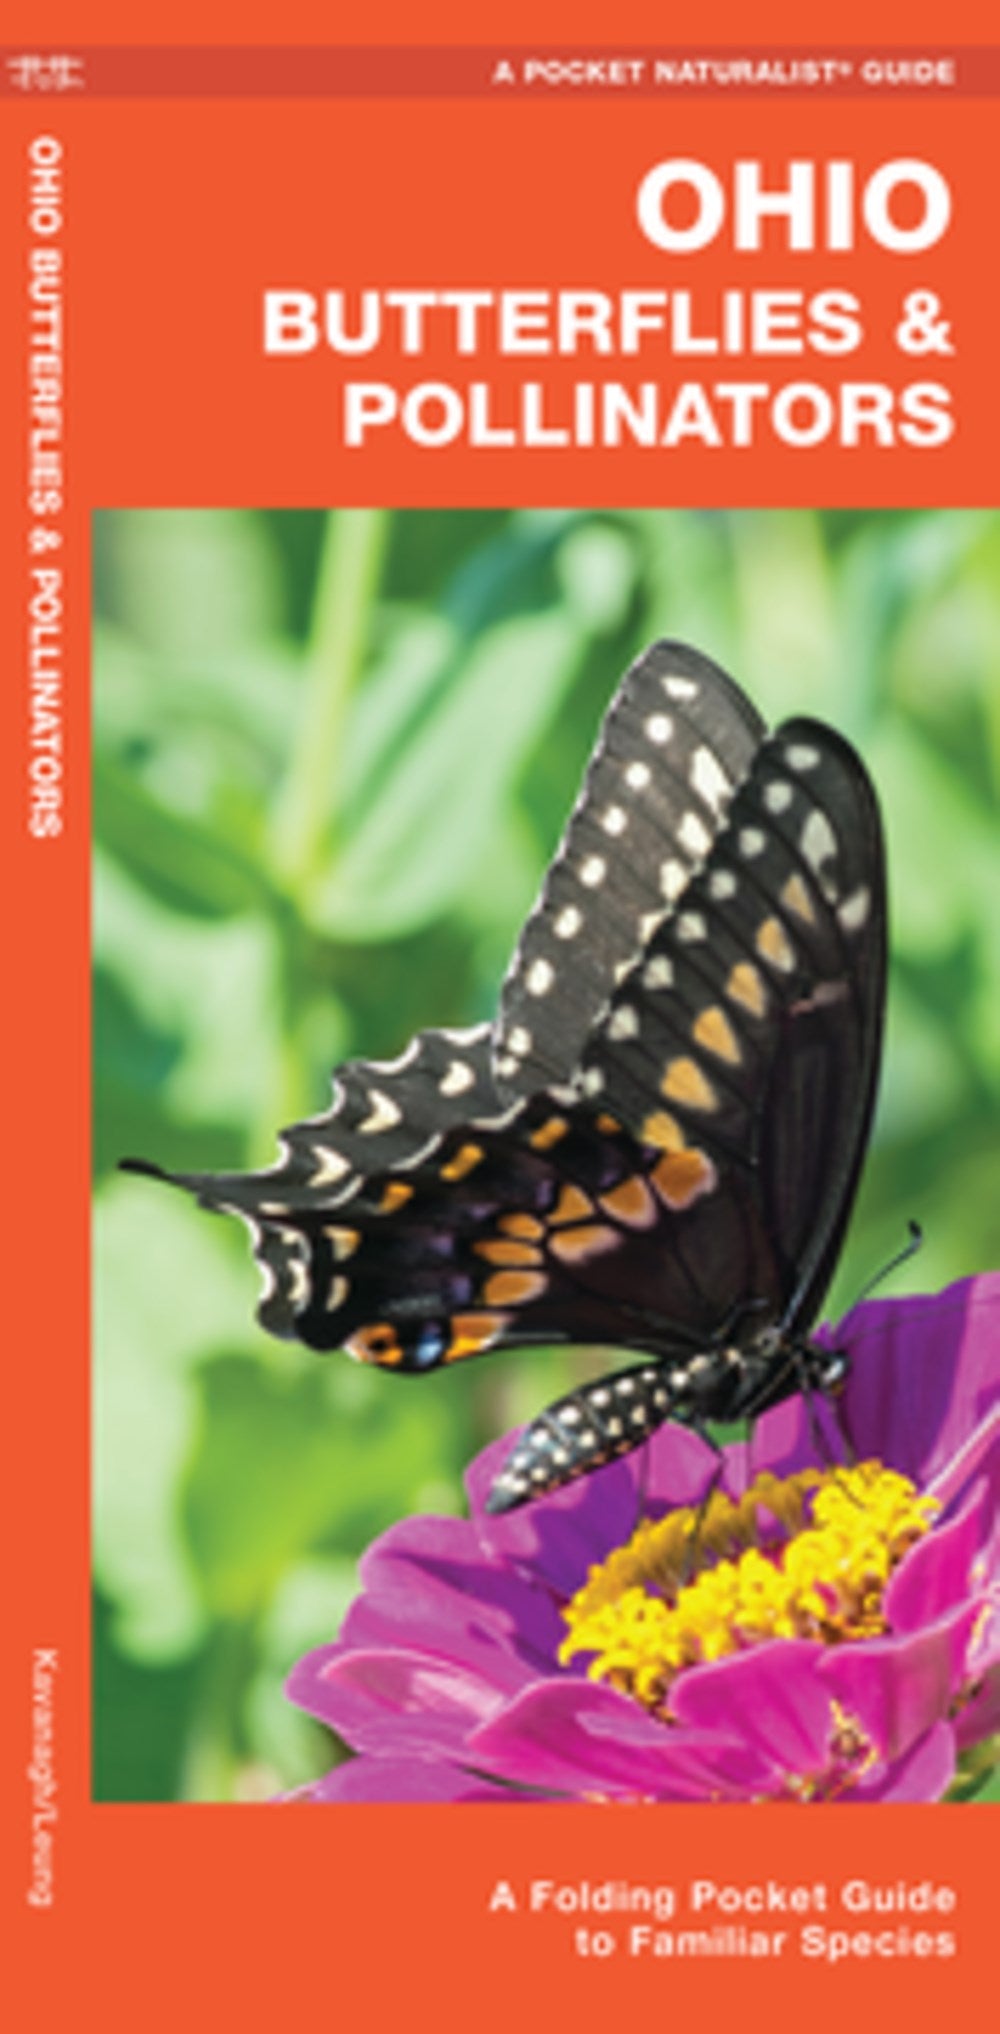 Ohio Butterflies & Pollinators: A Folding Pocket Guide to Familiar Species (2nd Edition)